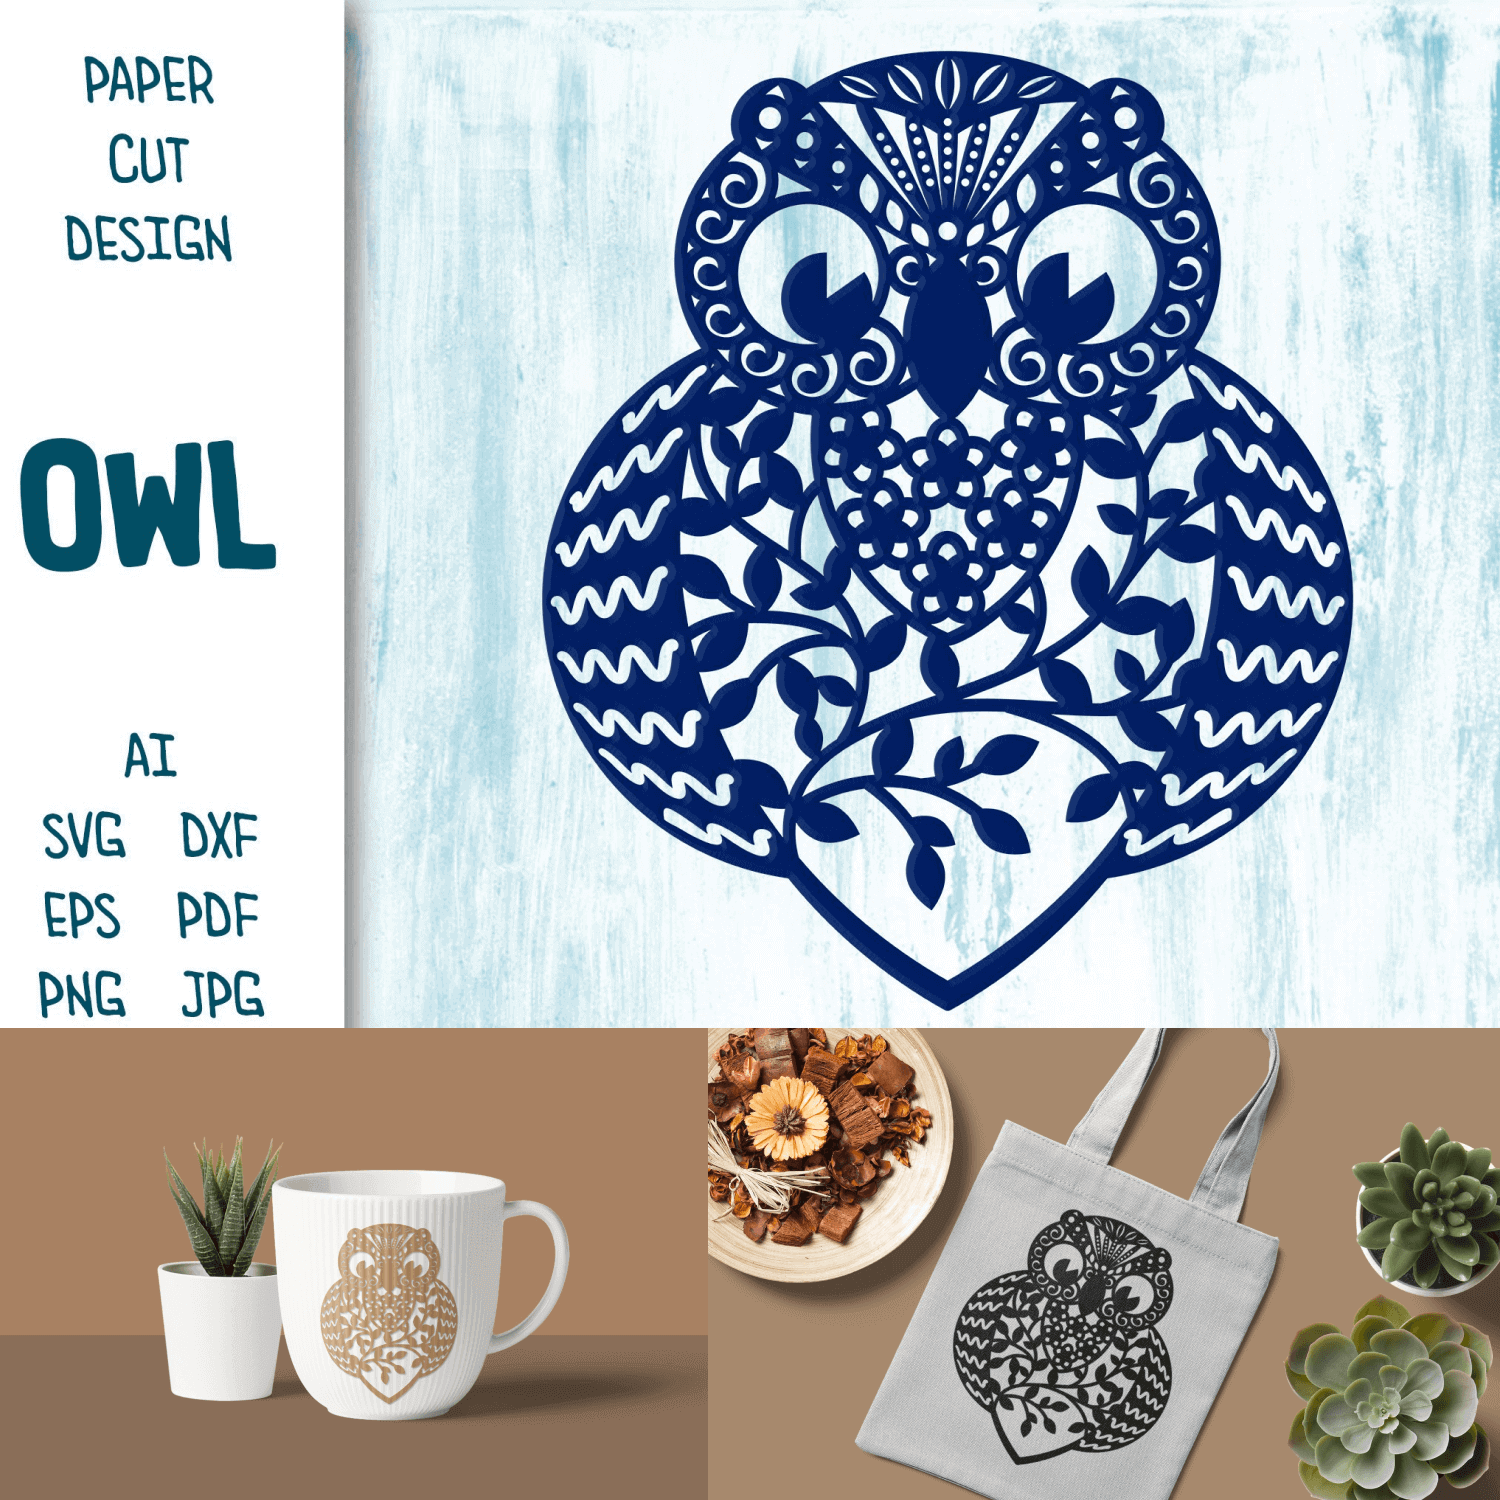 Owl SVG cut design for Silhouette and Cricut.